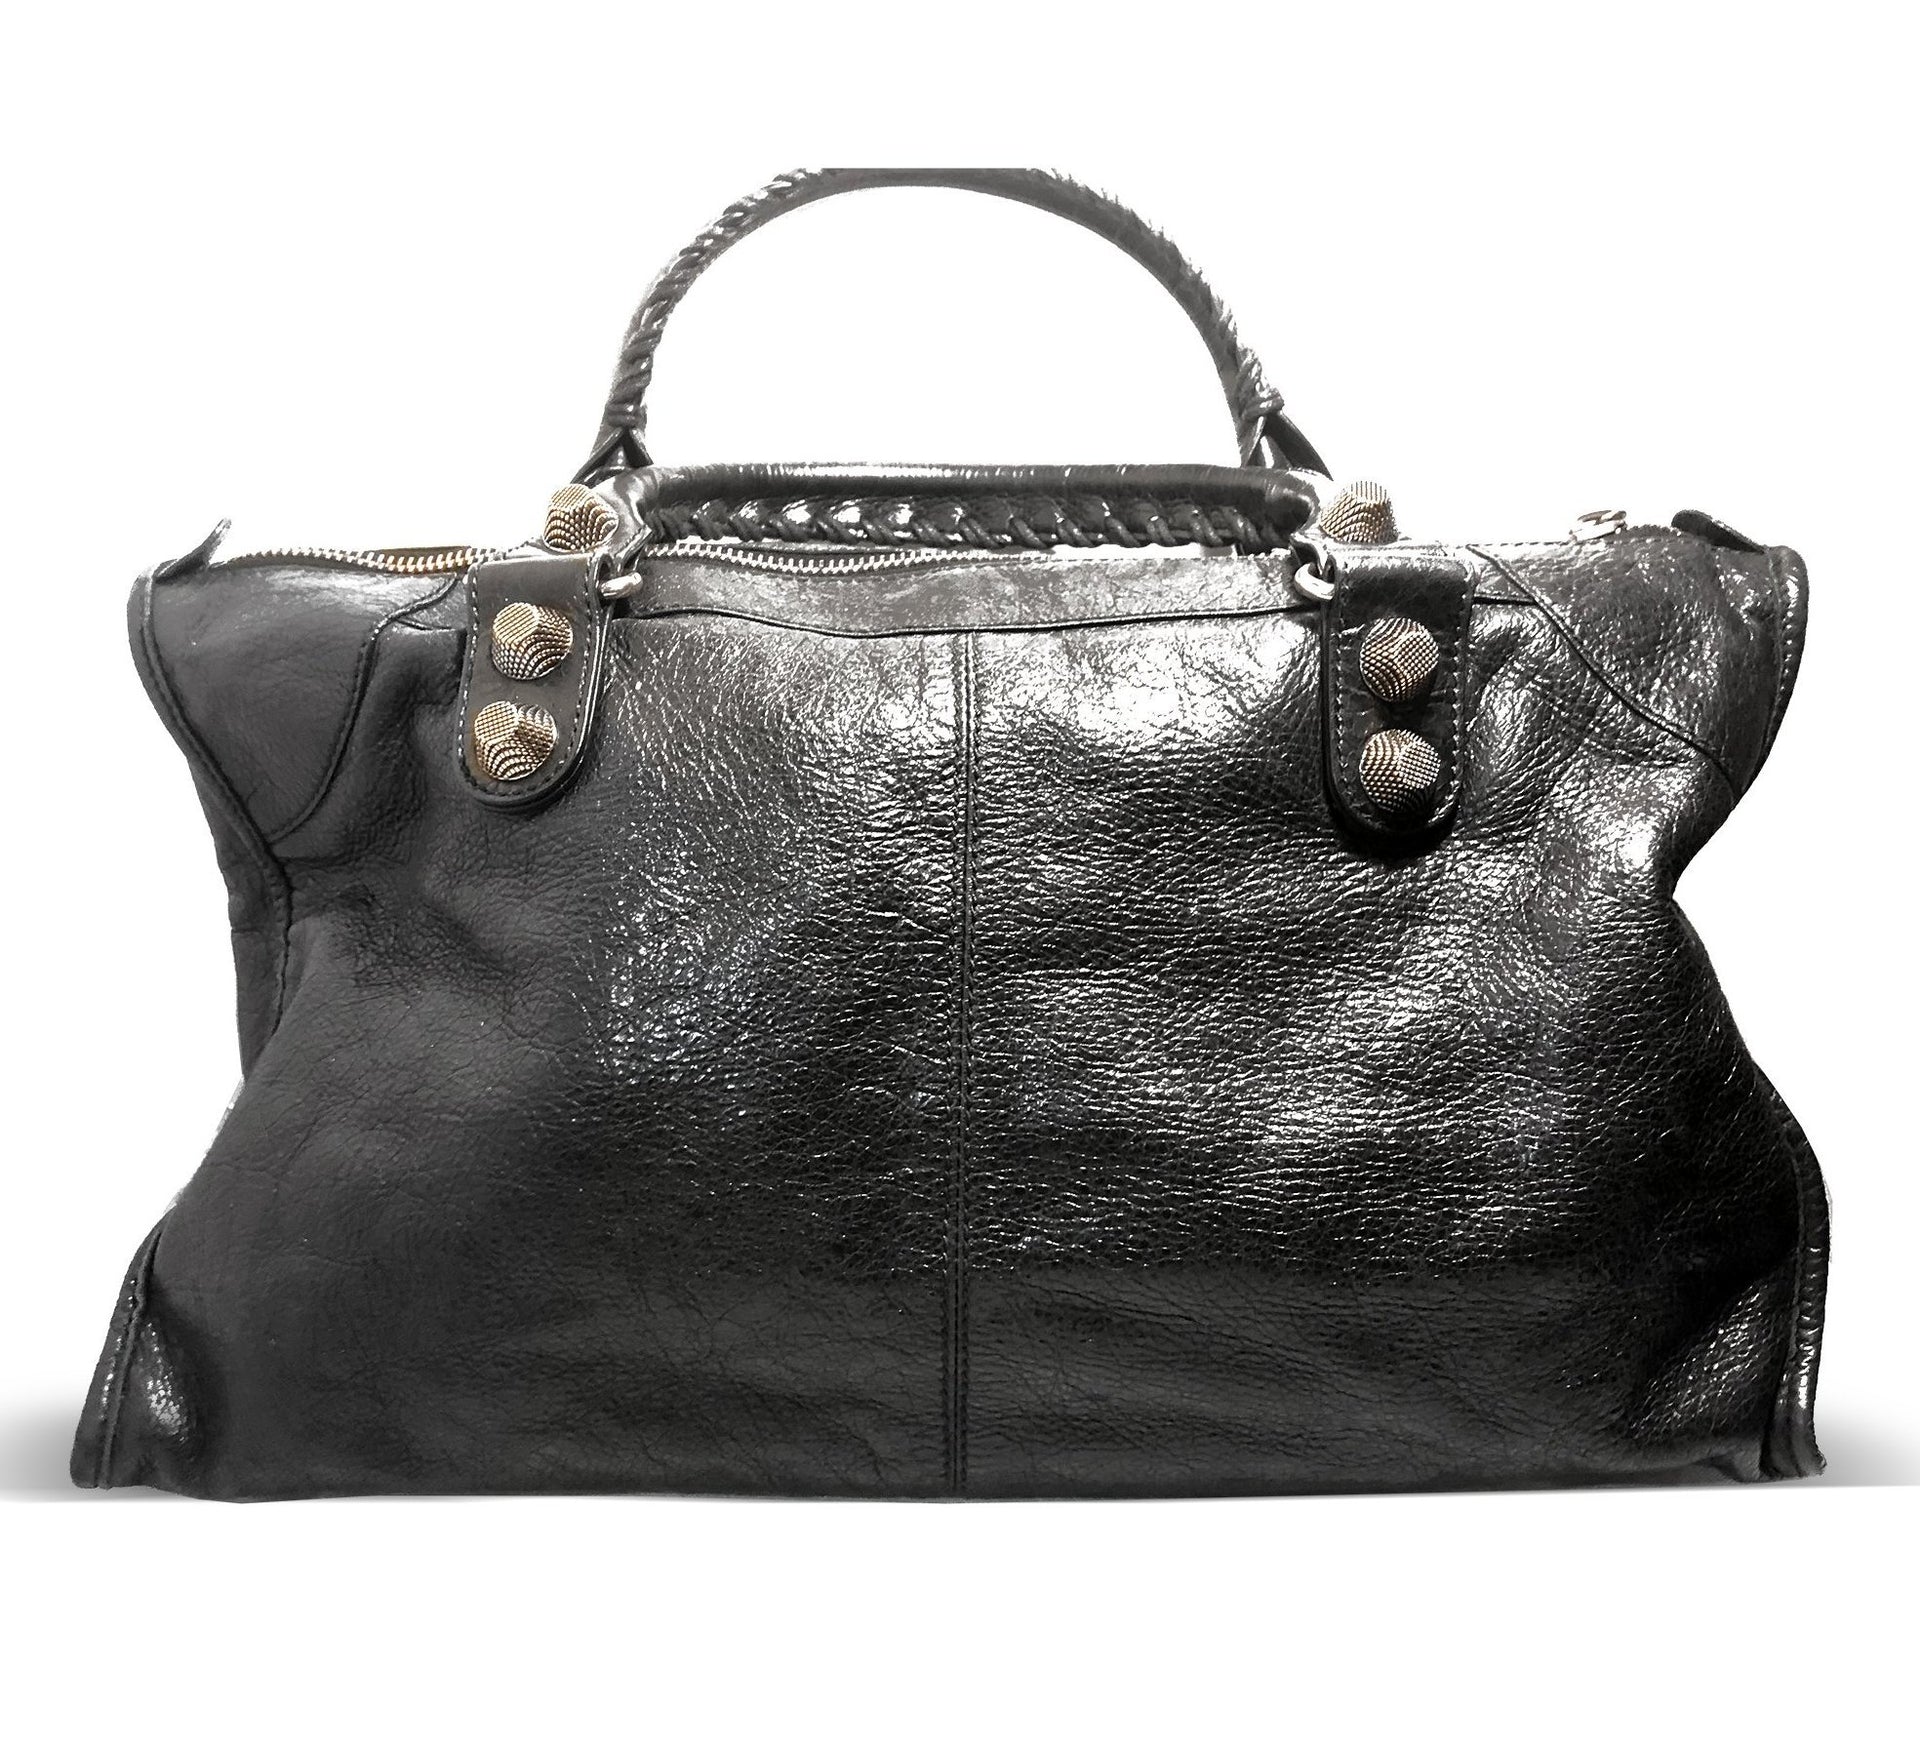 Balenciaga Gaint 21 Work Leather Tote with Classic Studs